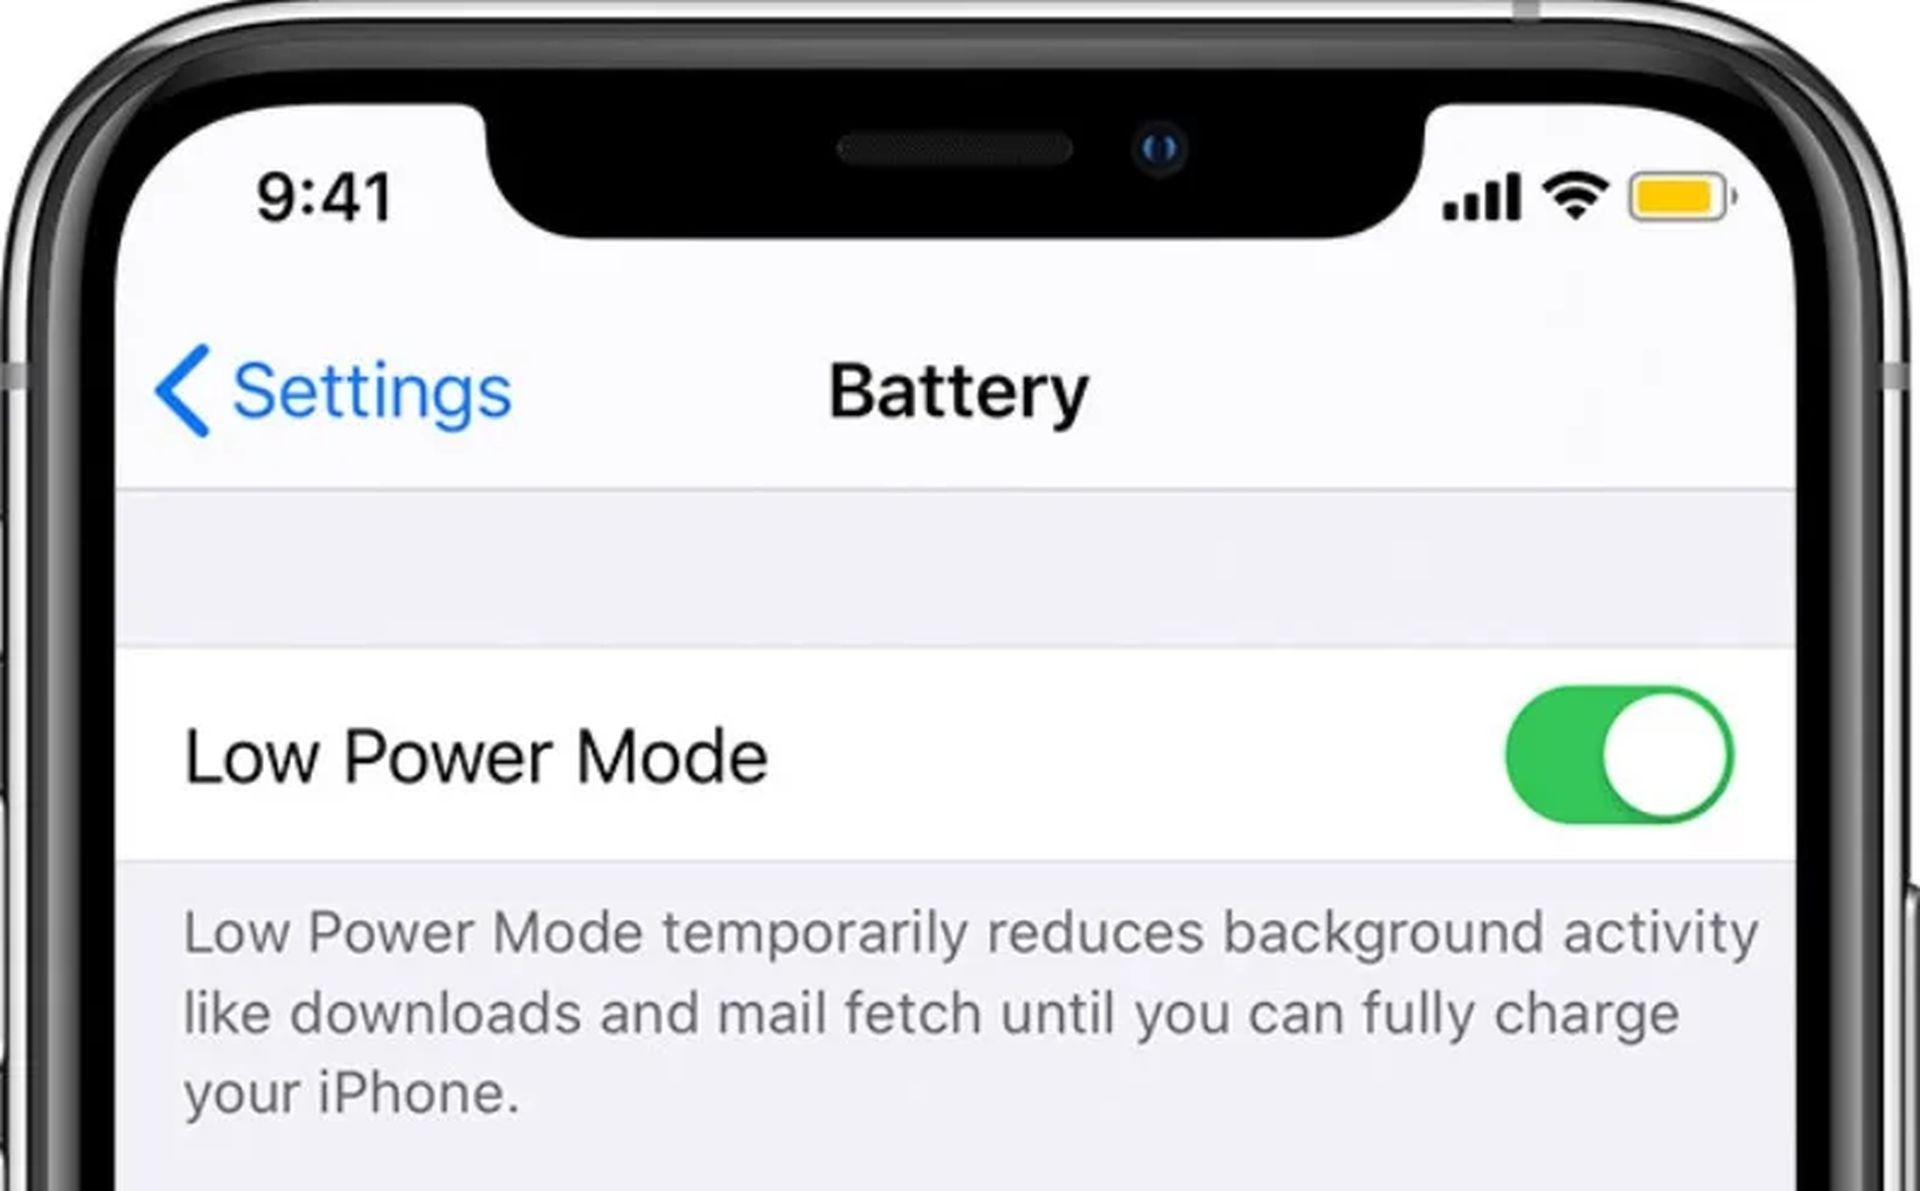 Today, we are covering how to turn off low power mode on iOS and Android, so you don't worry about functionalities being limited while your battery is low.